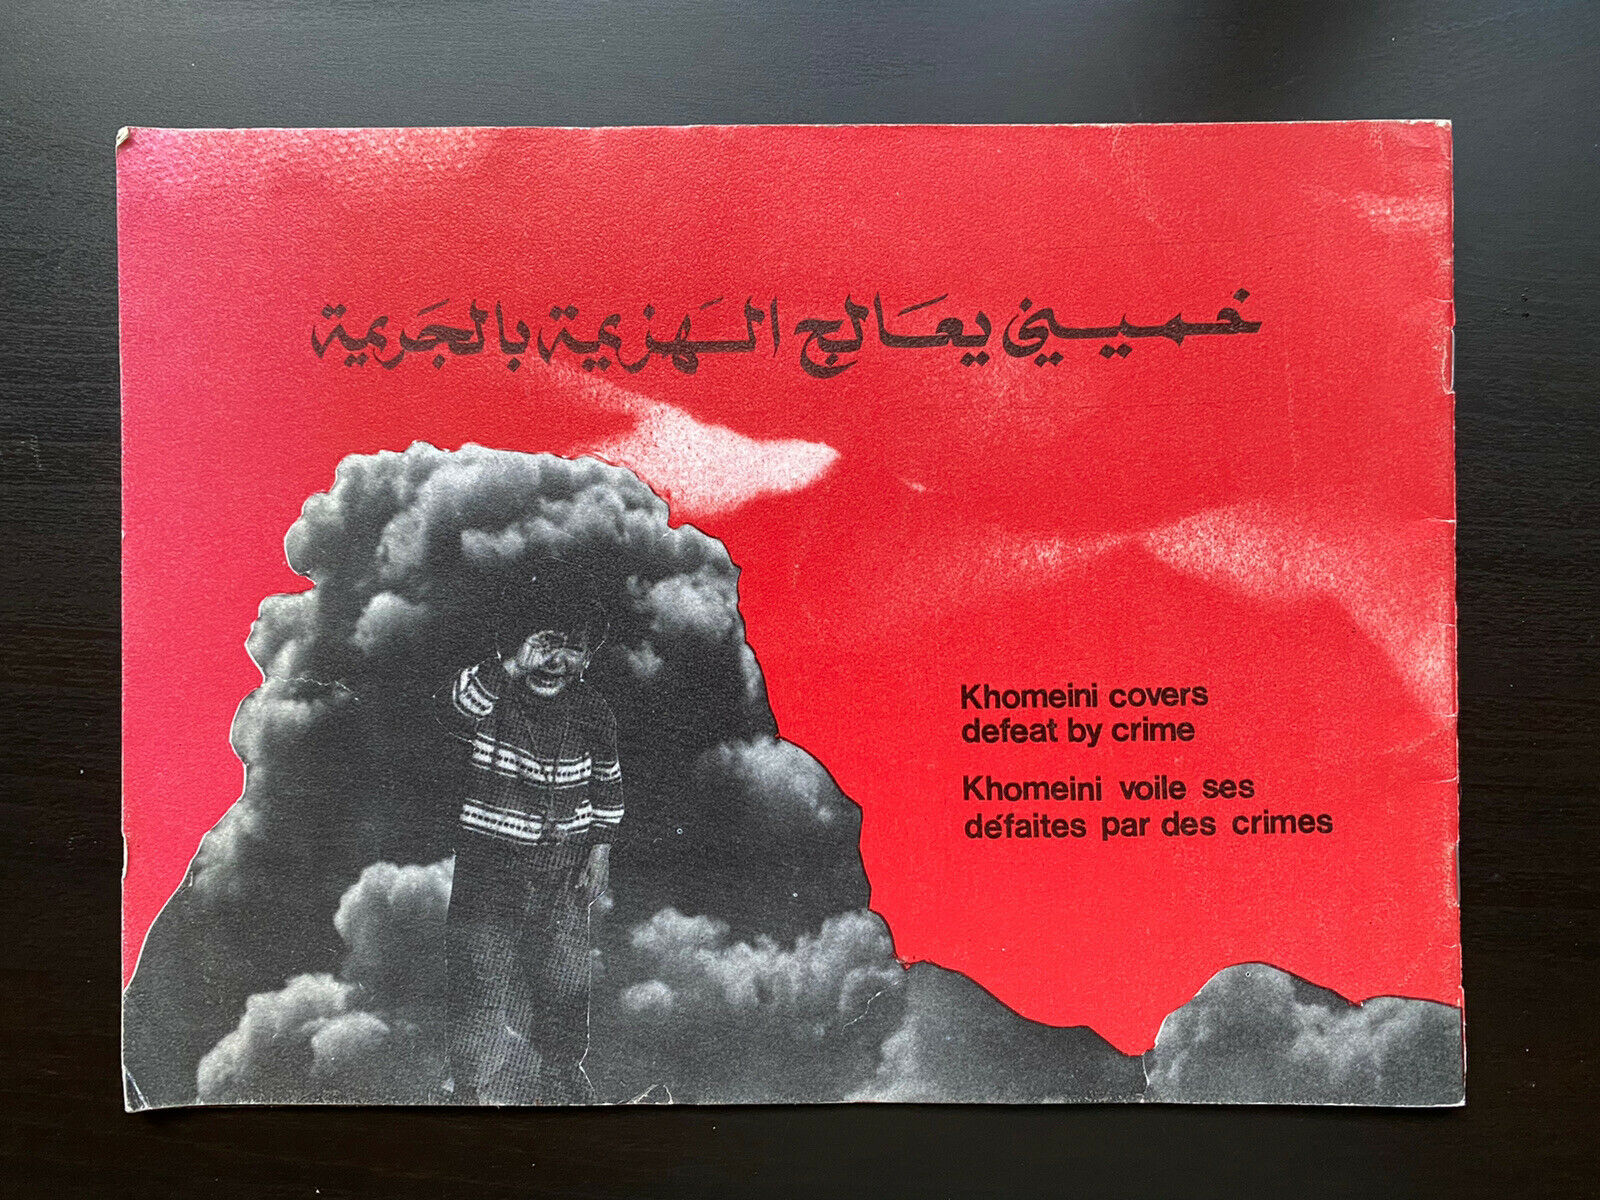 Vtg Khomeini Covers Defeat By Crime Booklet